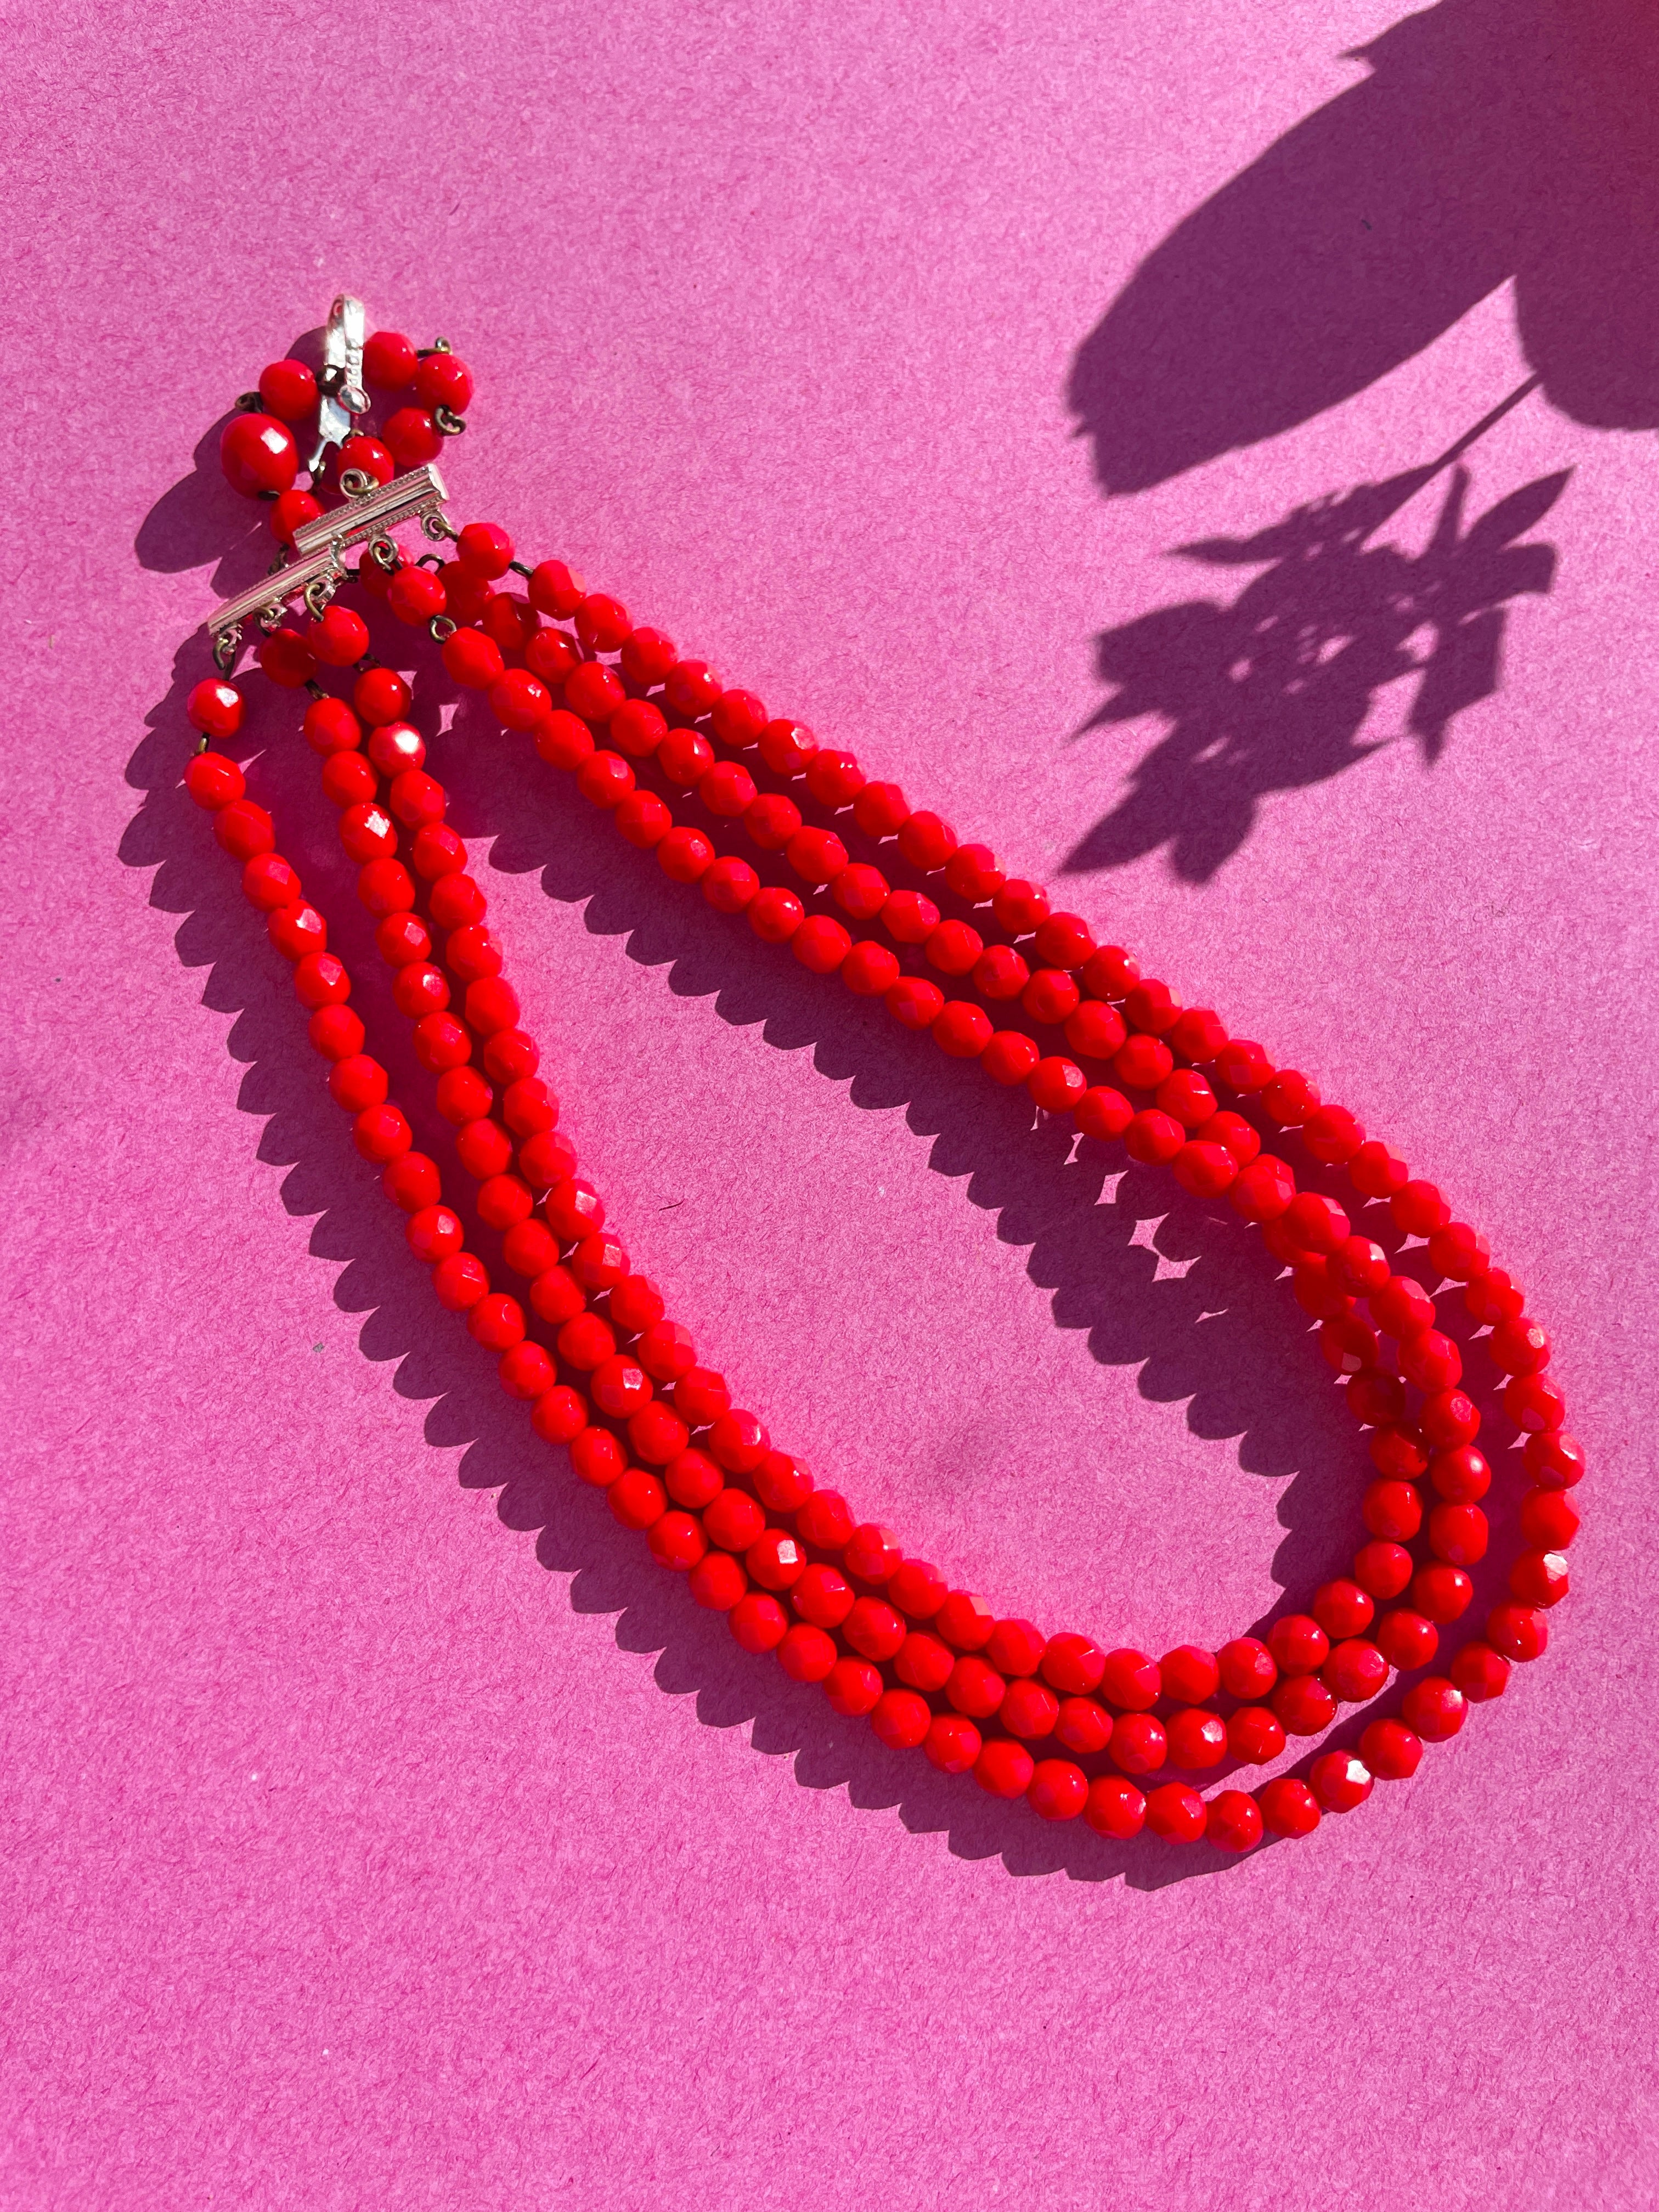 Triple Red Glass Bead Necklace